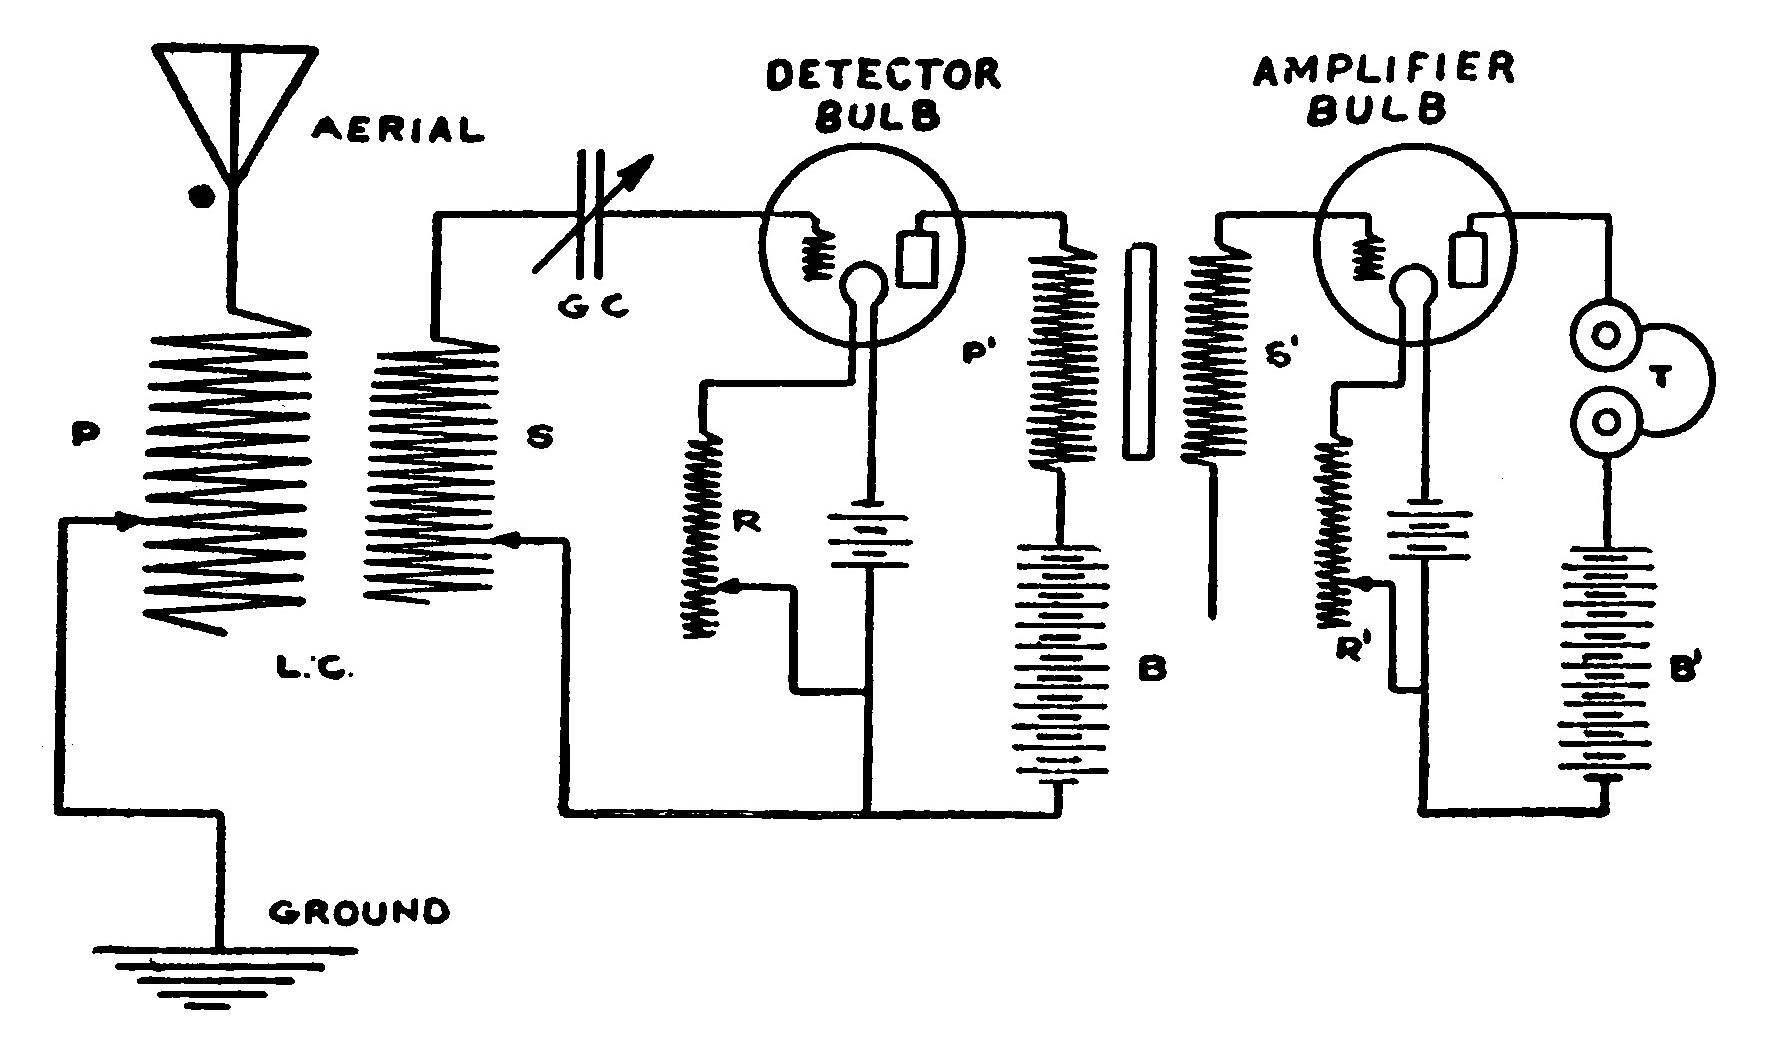 FIG. 64. The Audion Amplifier Circuit.